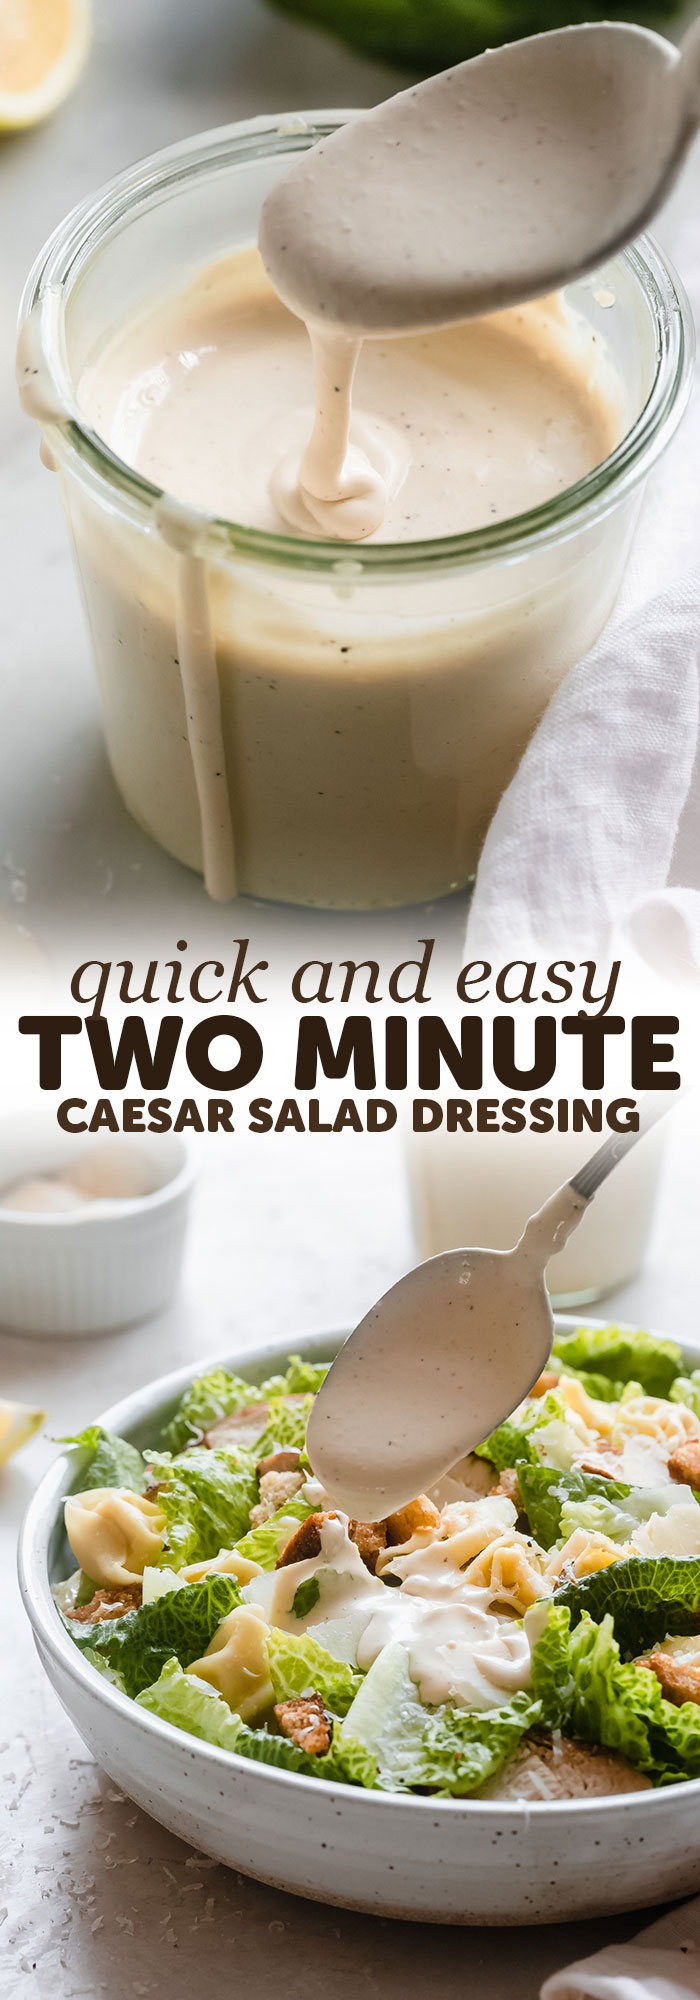 2-Minute Creamy Caesar salad Dressing - learn how to make the easiest, tastiest Caesar salad dressing at home! Just toss it all in a blender and give it a whiz! #caesarsalad #caesardressing #caesarsaladdressing #homemadedressing | Littlespicejar.com